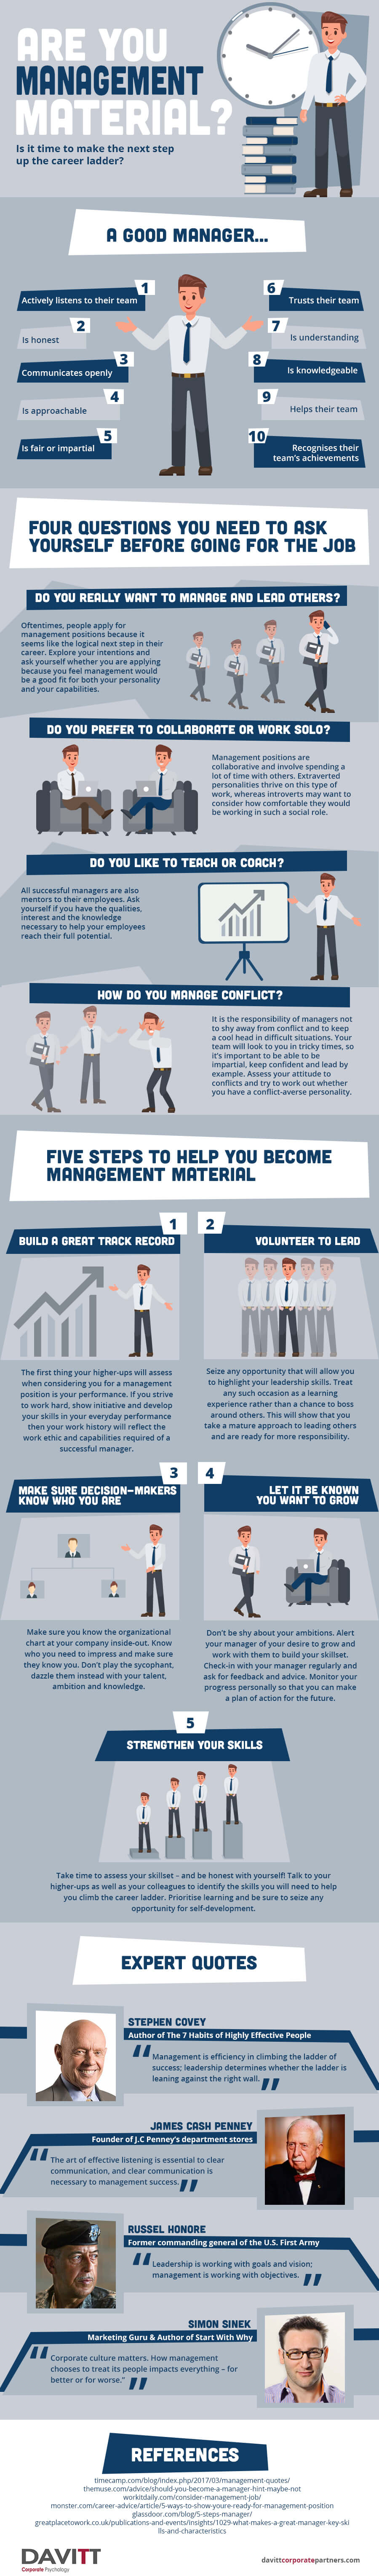 are-you-management-material-infographic